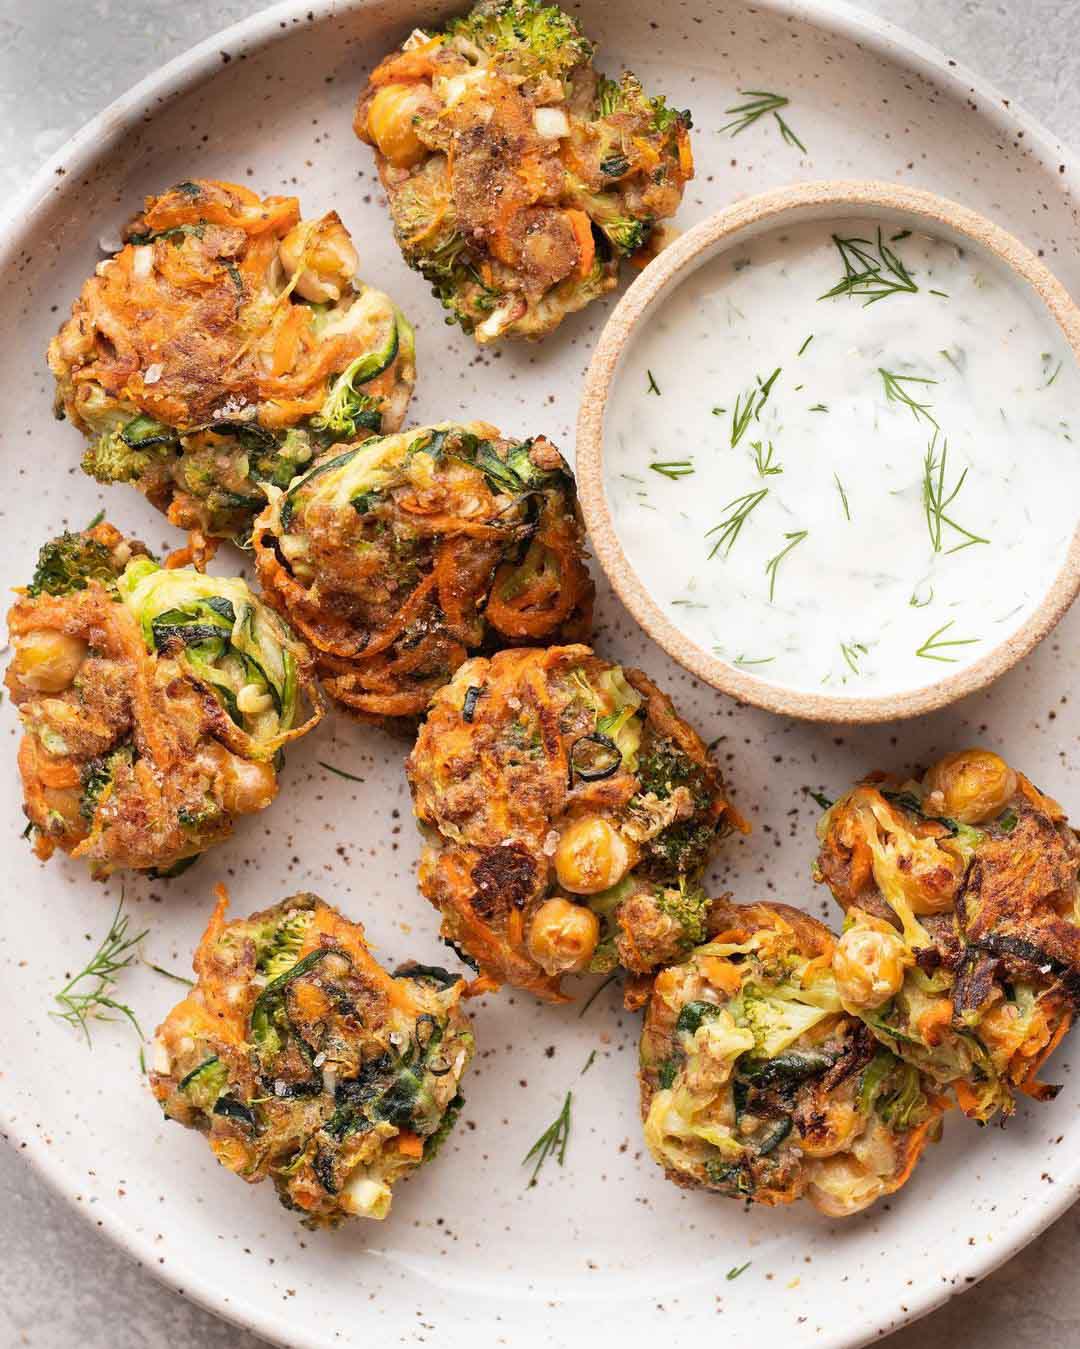 Vegan Broccoli Chickpea Fritters recipe served on a plate.